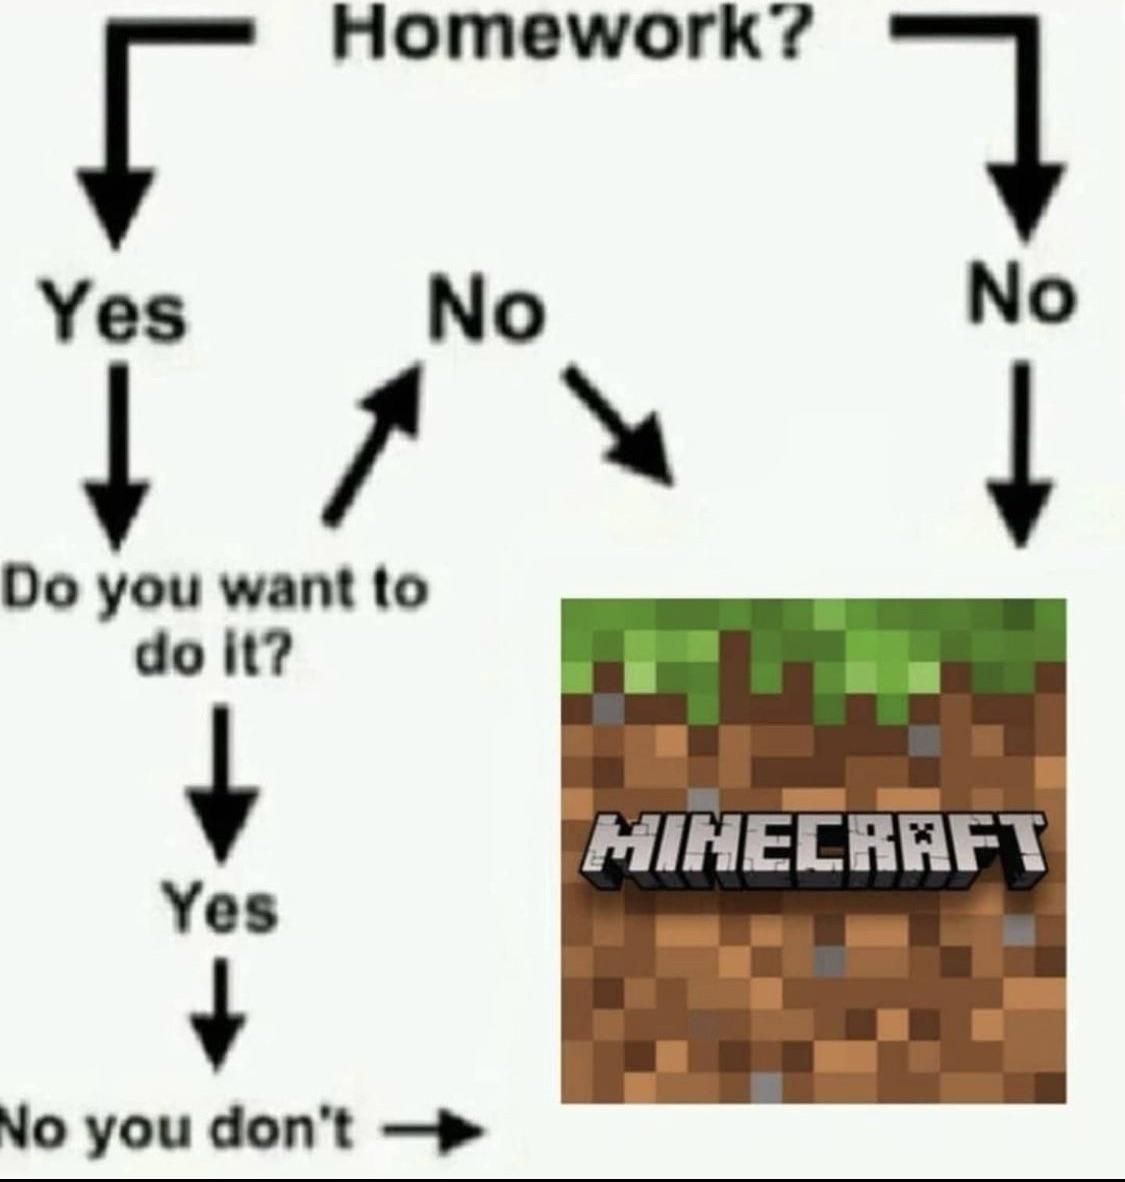 Every excuse is ok for playing minecraft